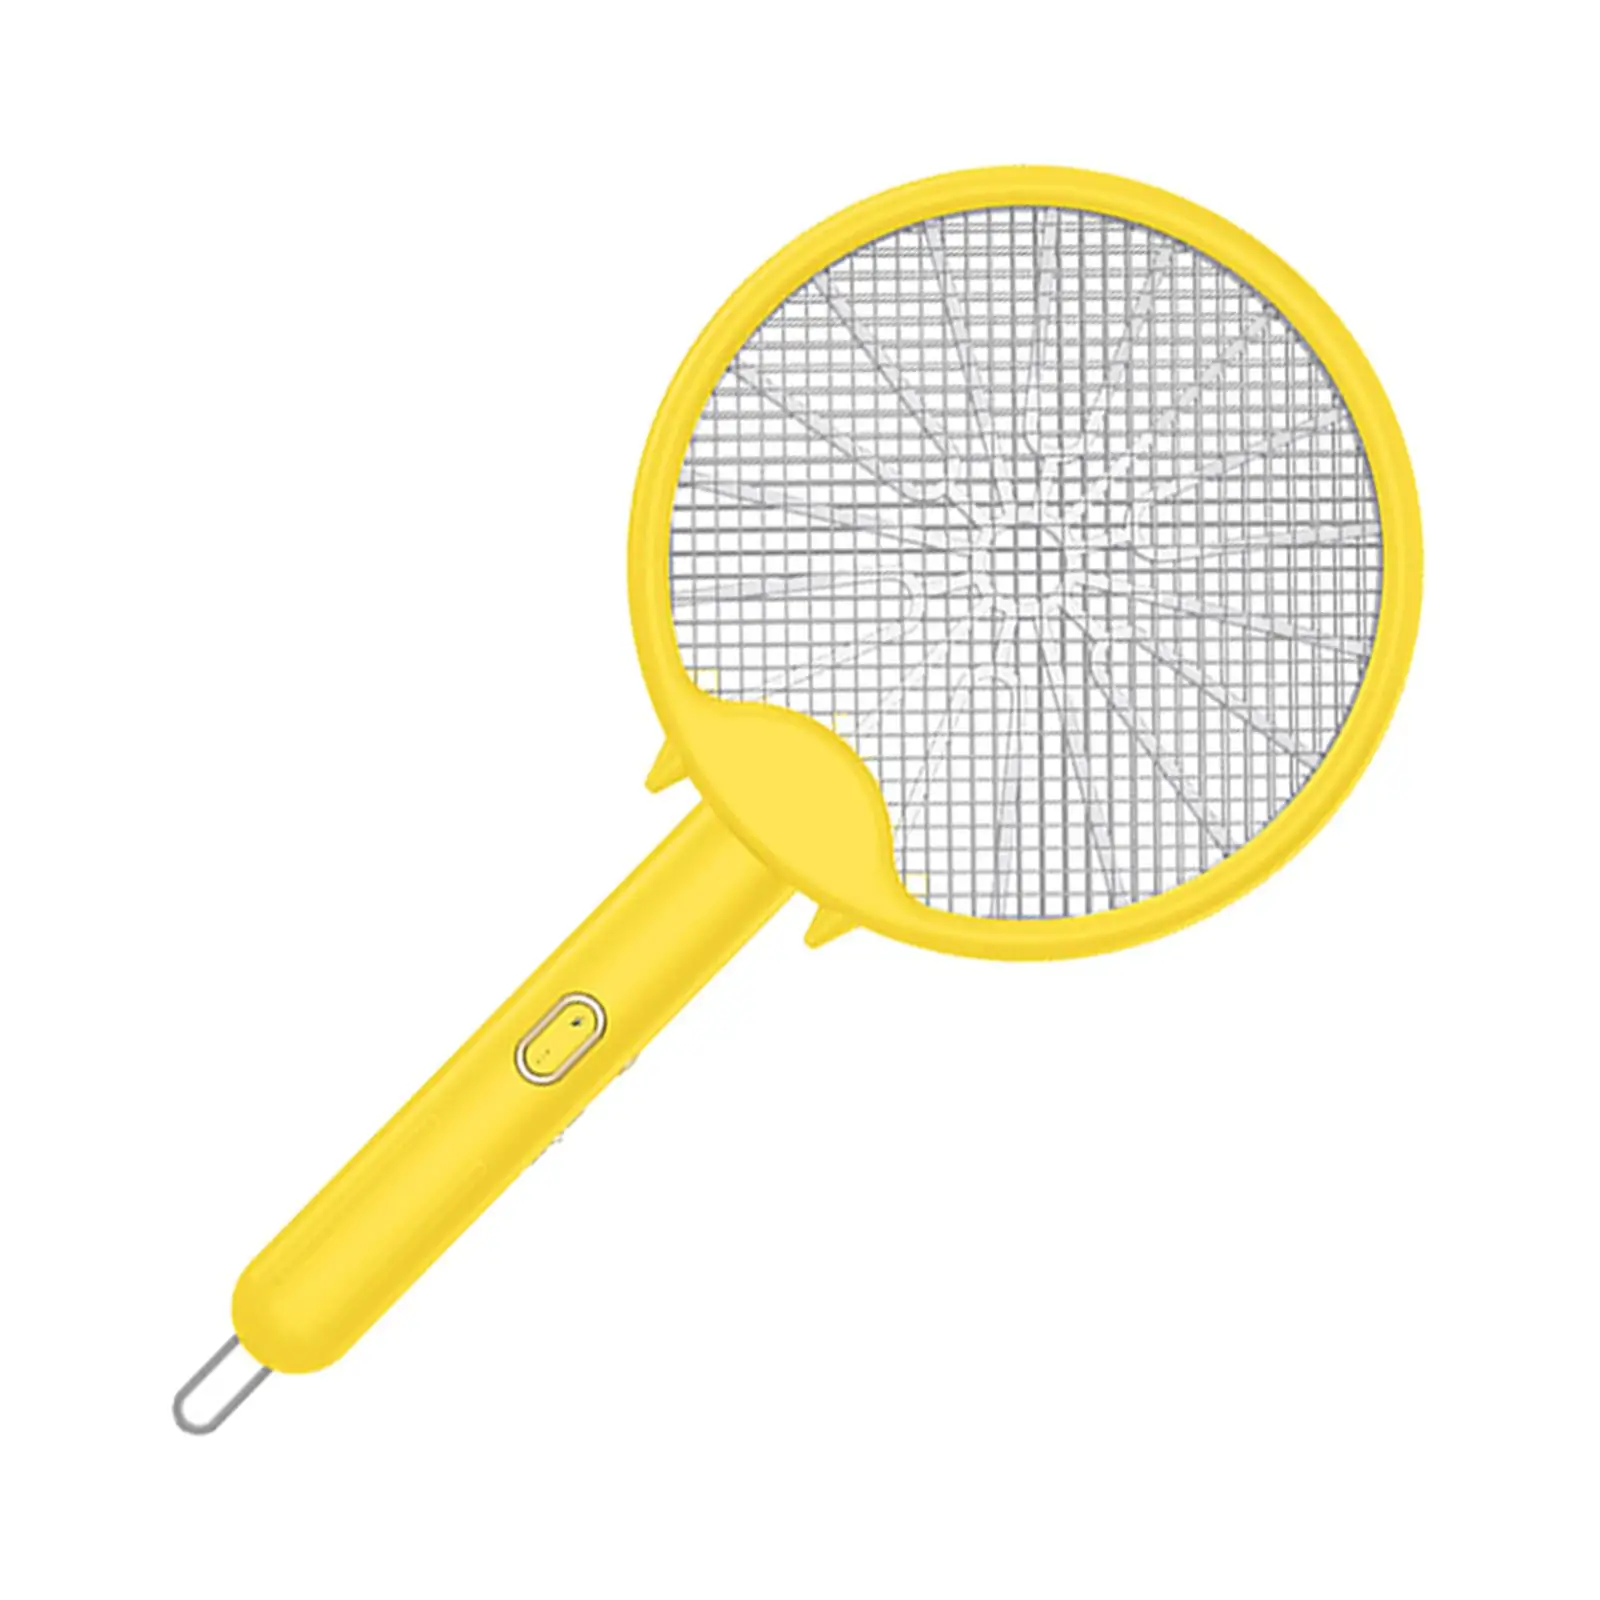 Electric Fly Swatter Racket Fly Swatter Repellent Lamp 3000V Folding Mosquito Killer Lamp for Backyard Home Patio Bedroom Office